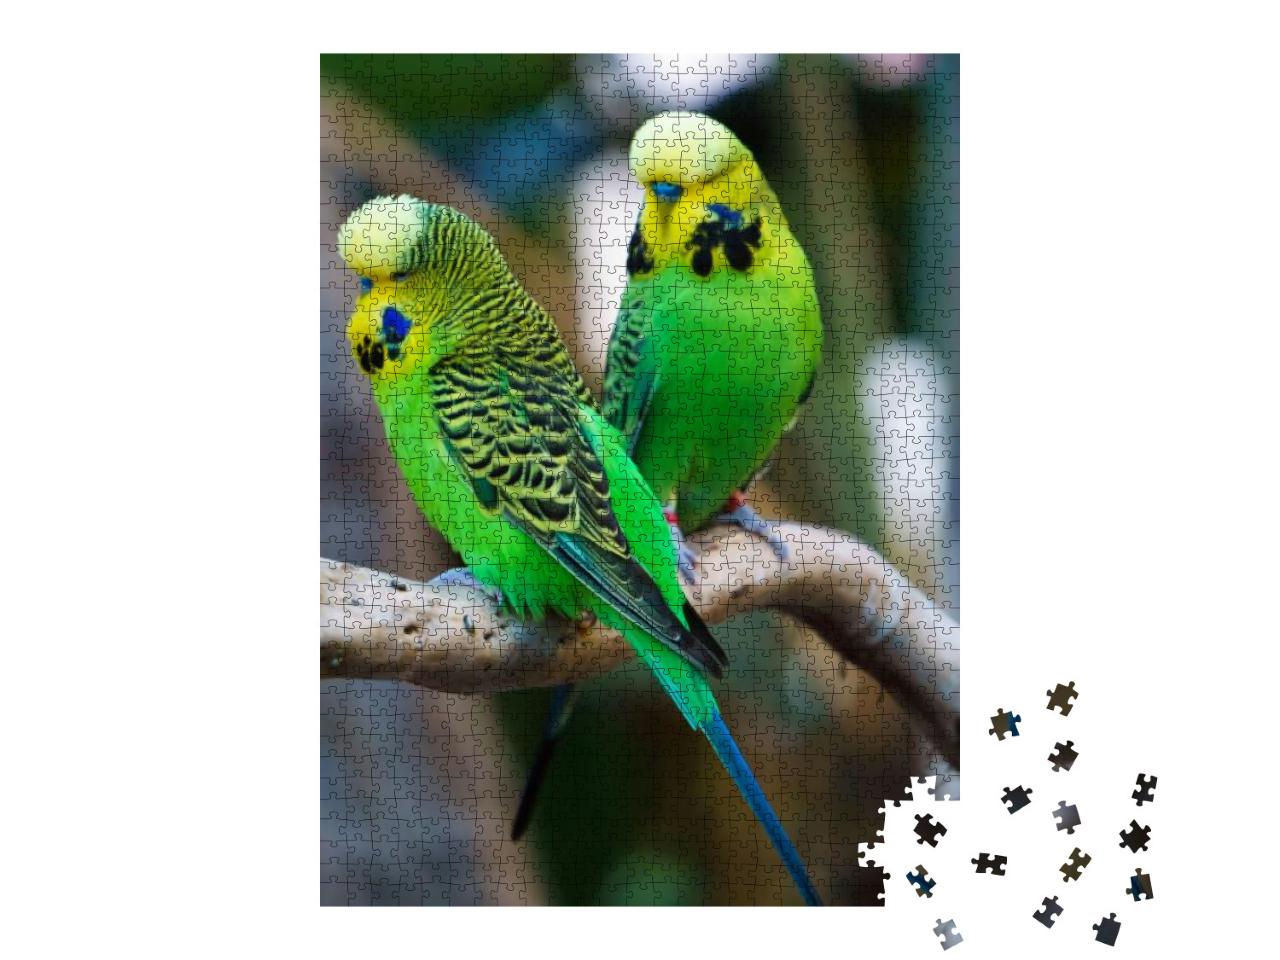 Two Budgerigars Parrot Birds Nicknamed the Budgie or the... Jigsaw Puzzle with 1000 pieces